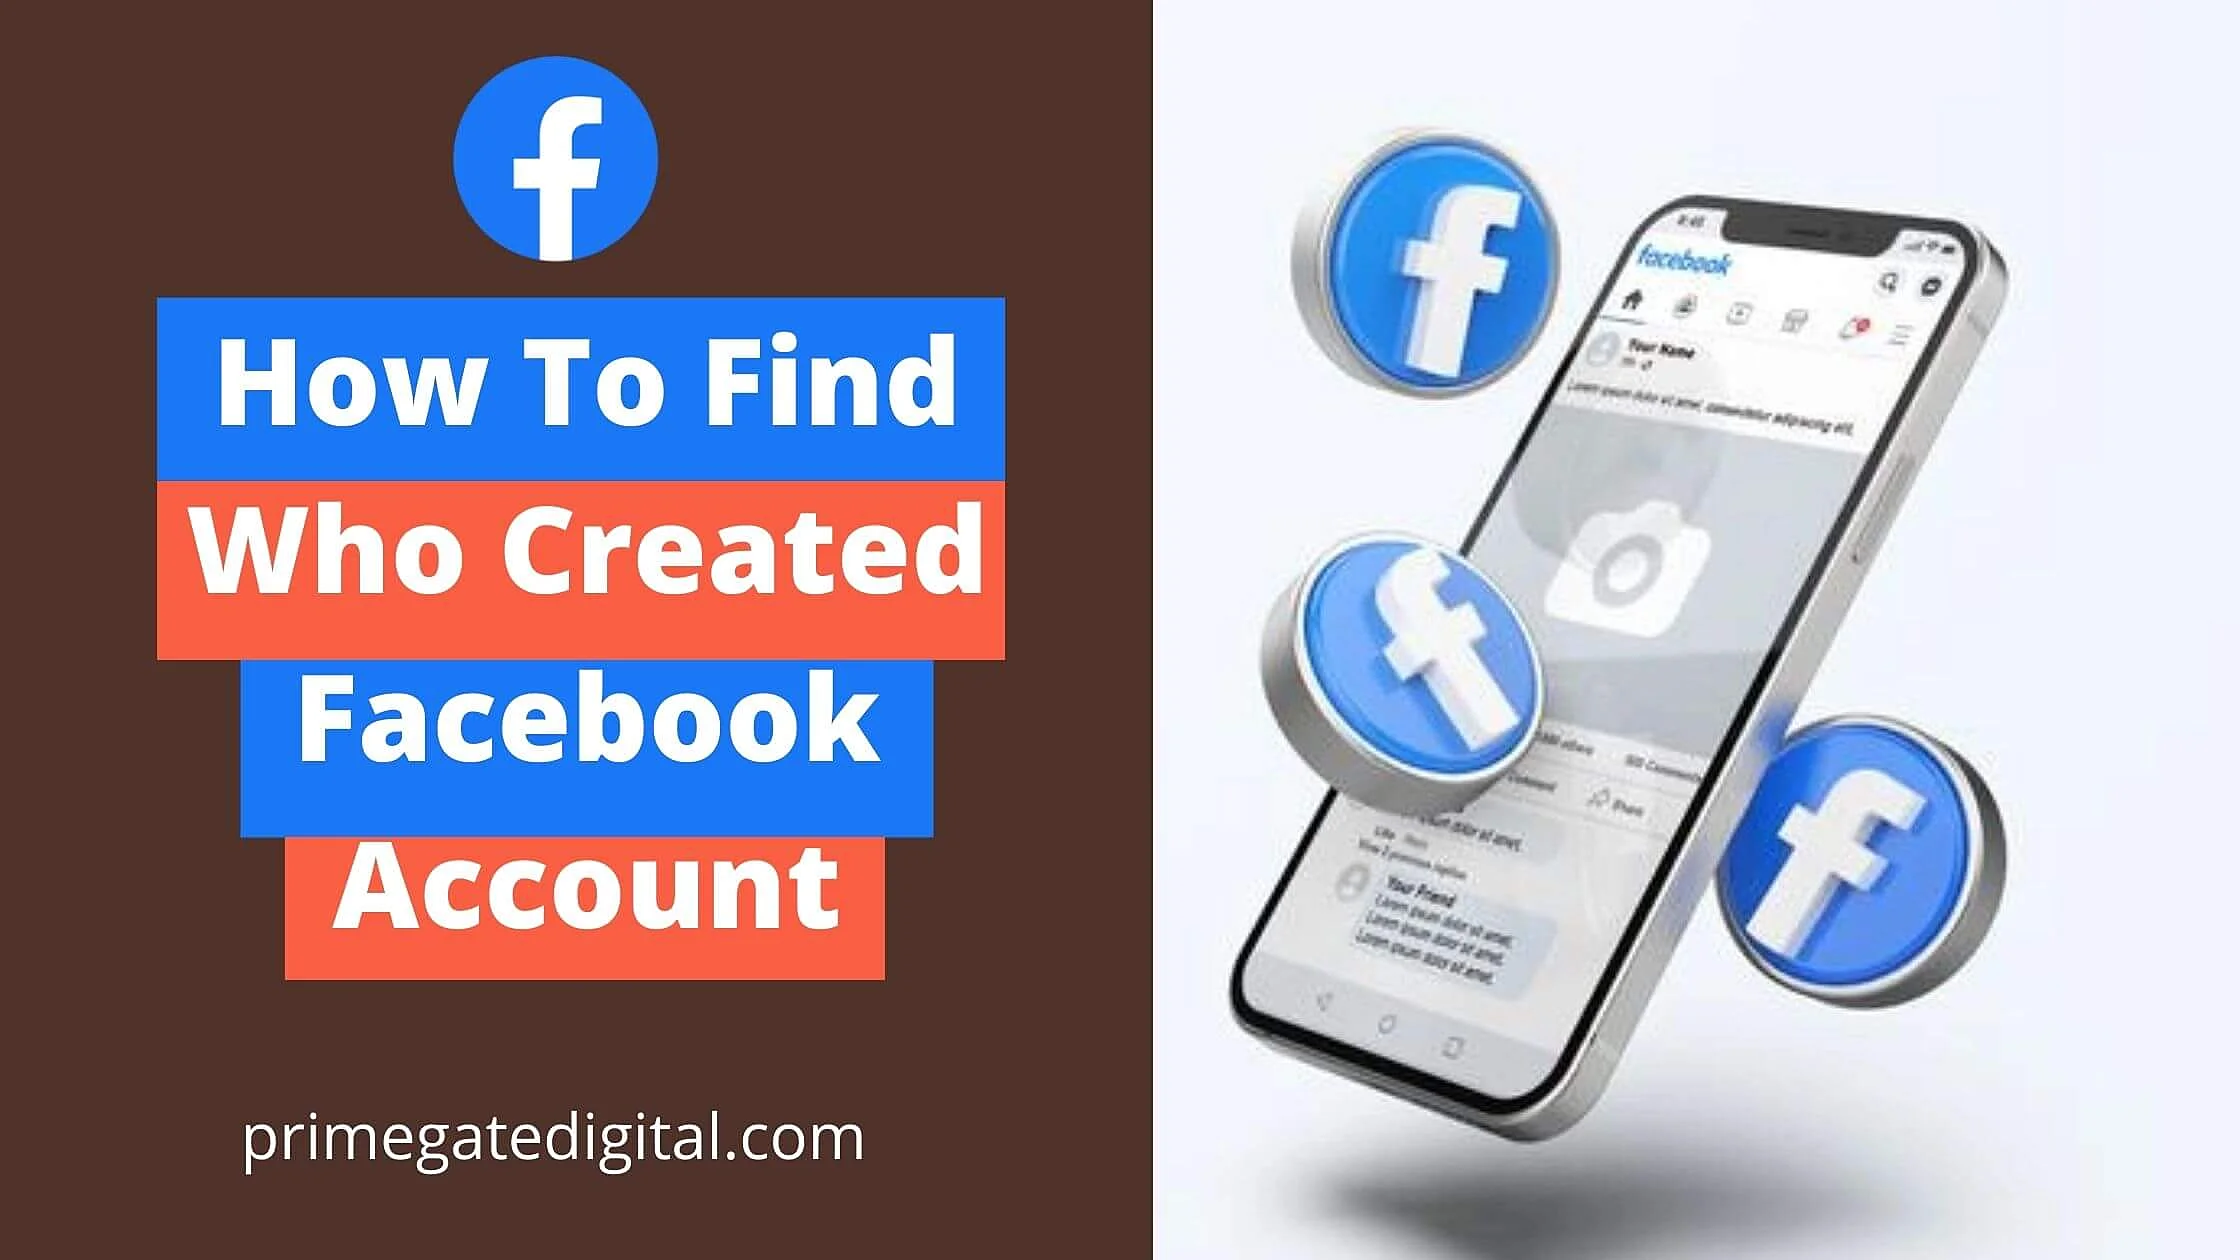 How To Find Who Created Facebook Account